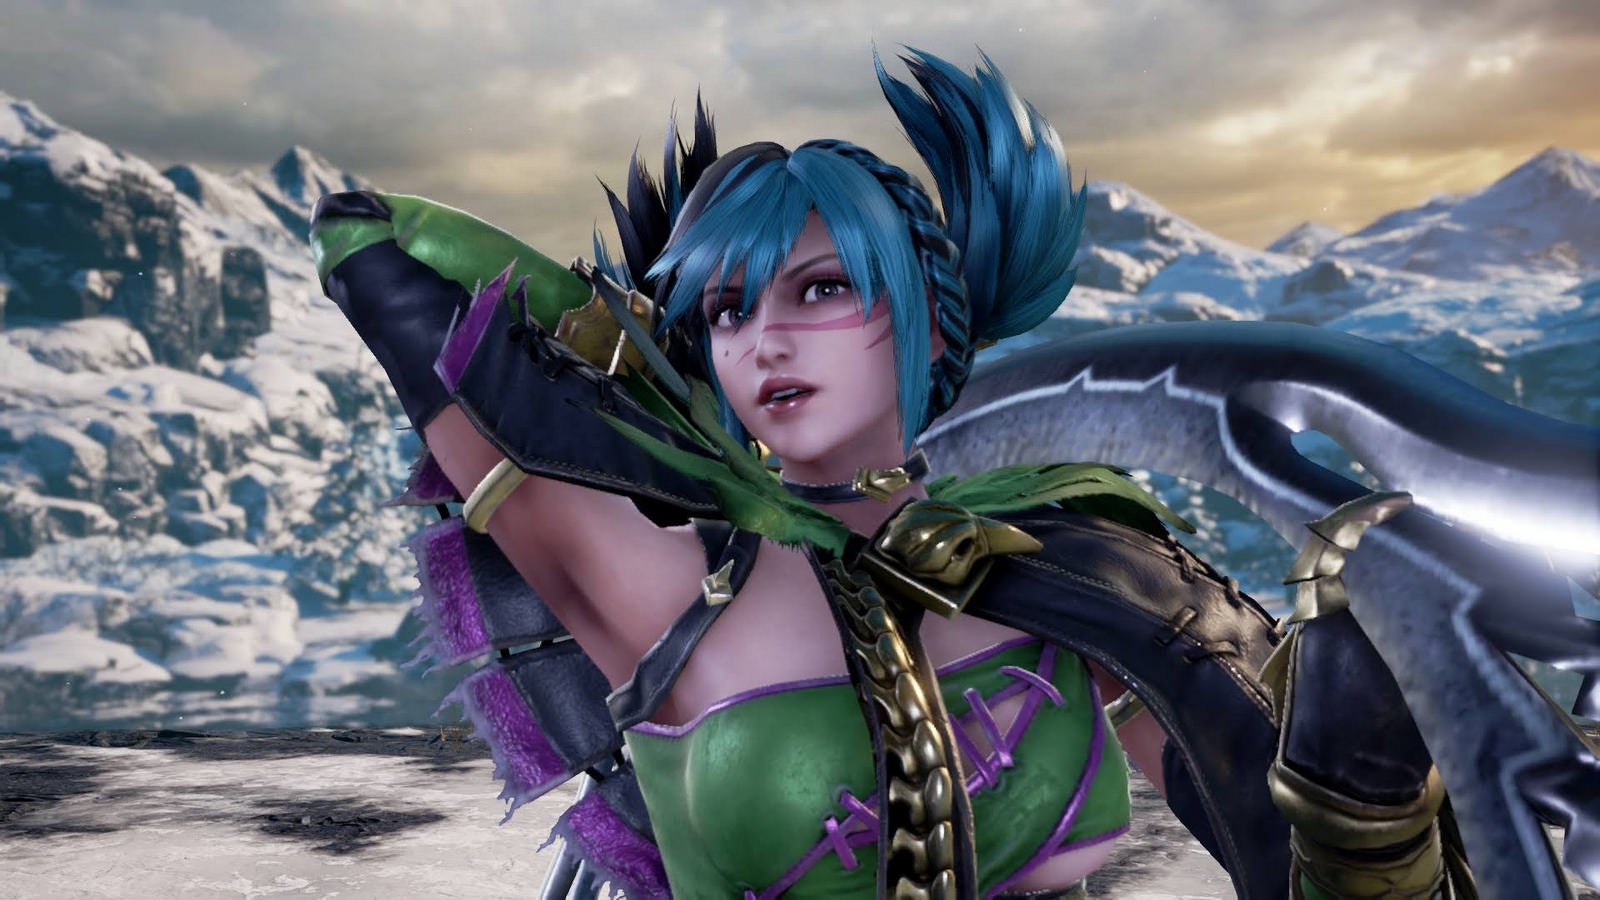 Image for Libra of Soul is the second story mode in Soulcalibur 6, Tira announced as Season Pass bonus